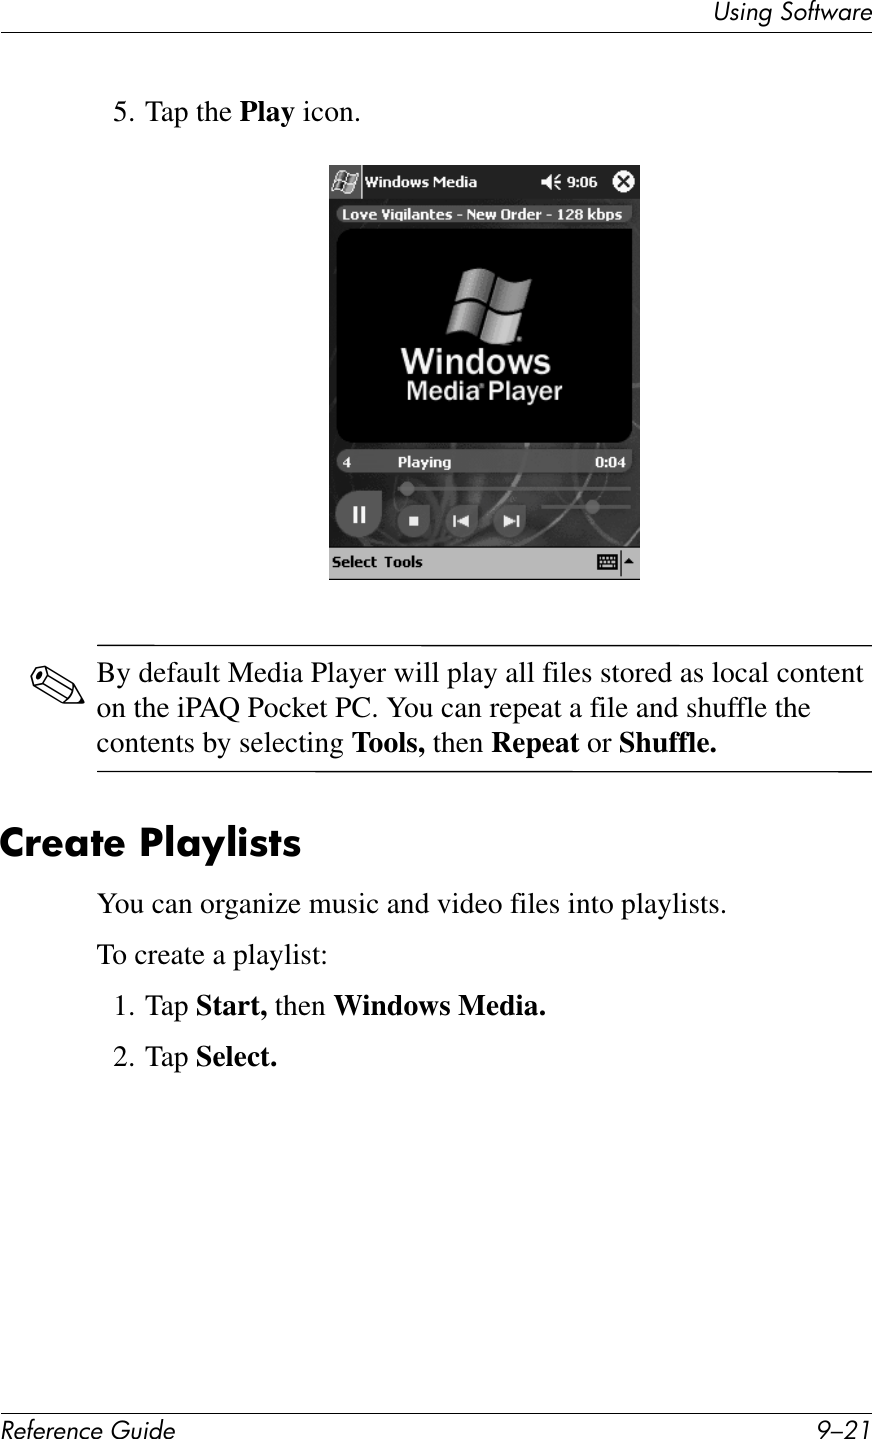 UL*%2&apos;37#1V4$&quot;!&quot;#&quot;$&quot;%&amp;&quot;&apos;()*+&quot; H/0.5. Tap the Play icon.✎By default Media Player will play all files stored as local content on the iPAQ Pocket PC. You can repeat a file and shuffle the contents by selecting Tools, then Repeat or Shuffle.2!&quot;;7&quot;&amp;S@;O@)878You can organize music and video files into playlists.To create a playlist:1. Tap Start, then Windows Media.2. Tap Select.